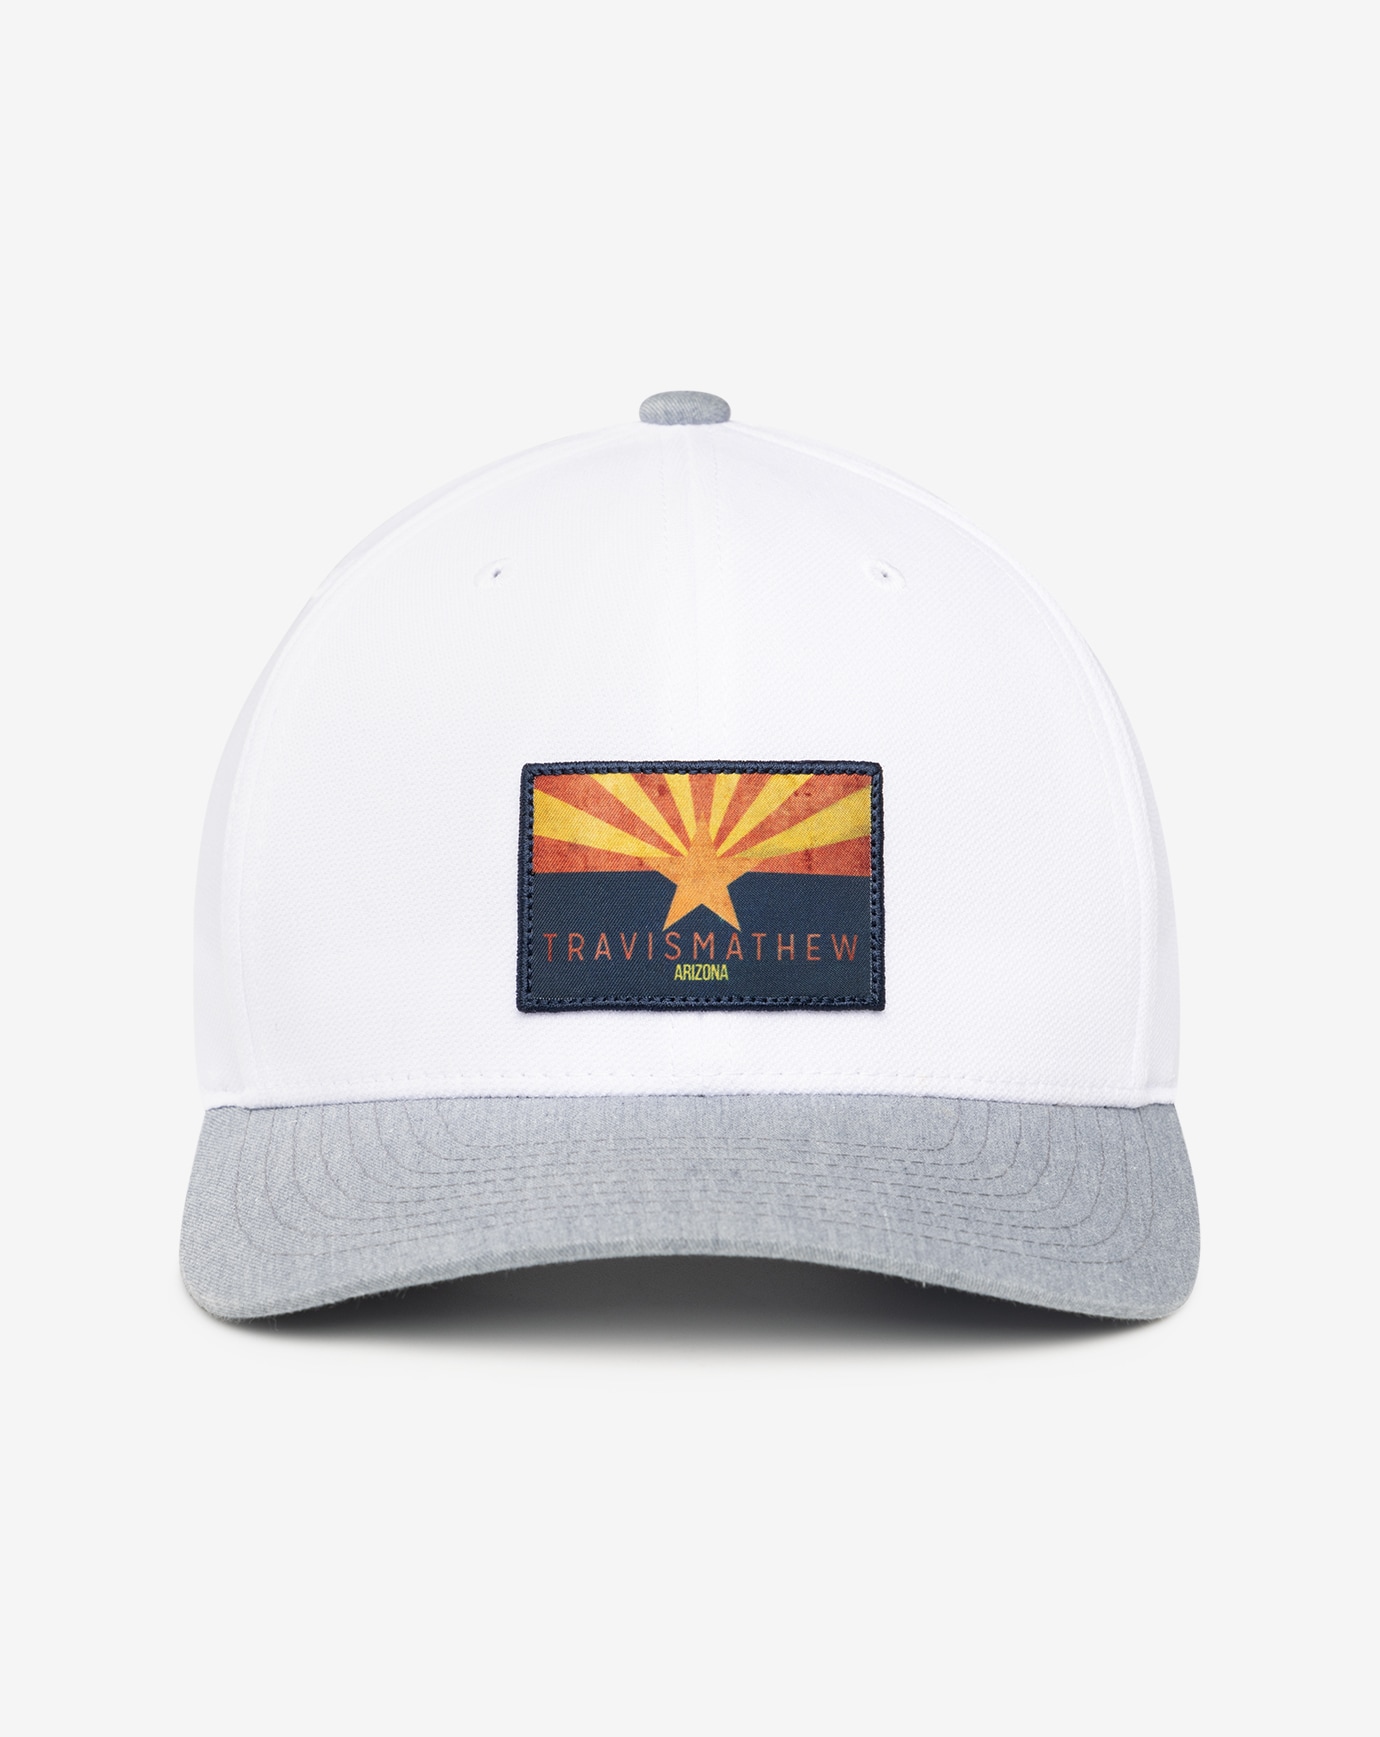 VALLEY OF THE SUN 2.0 SNAPBACK HAT Image Thumbnail 1